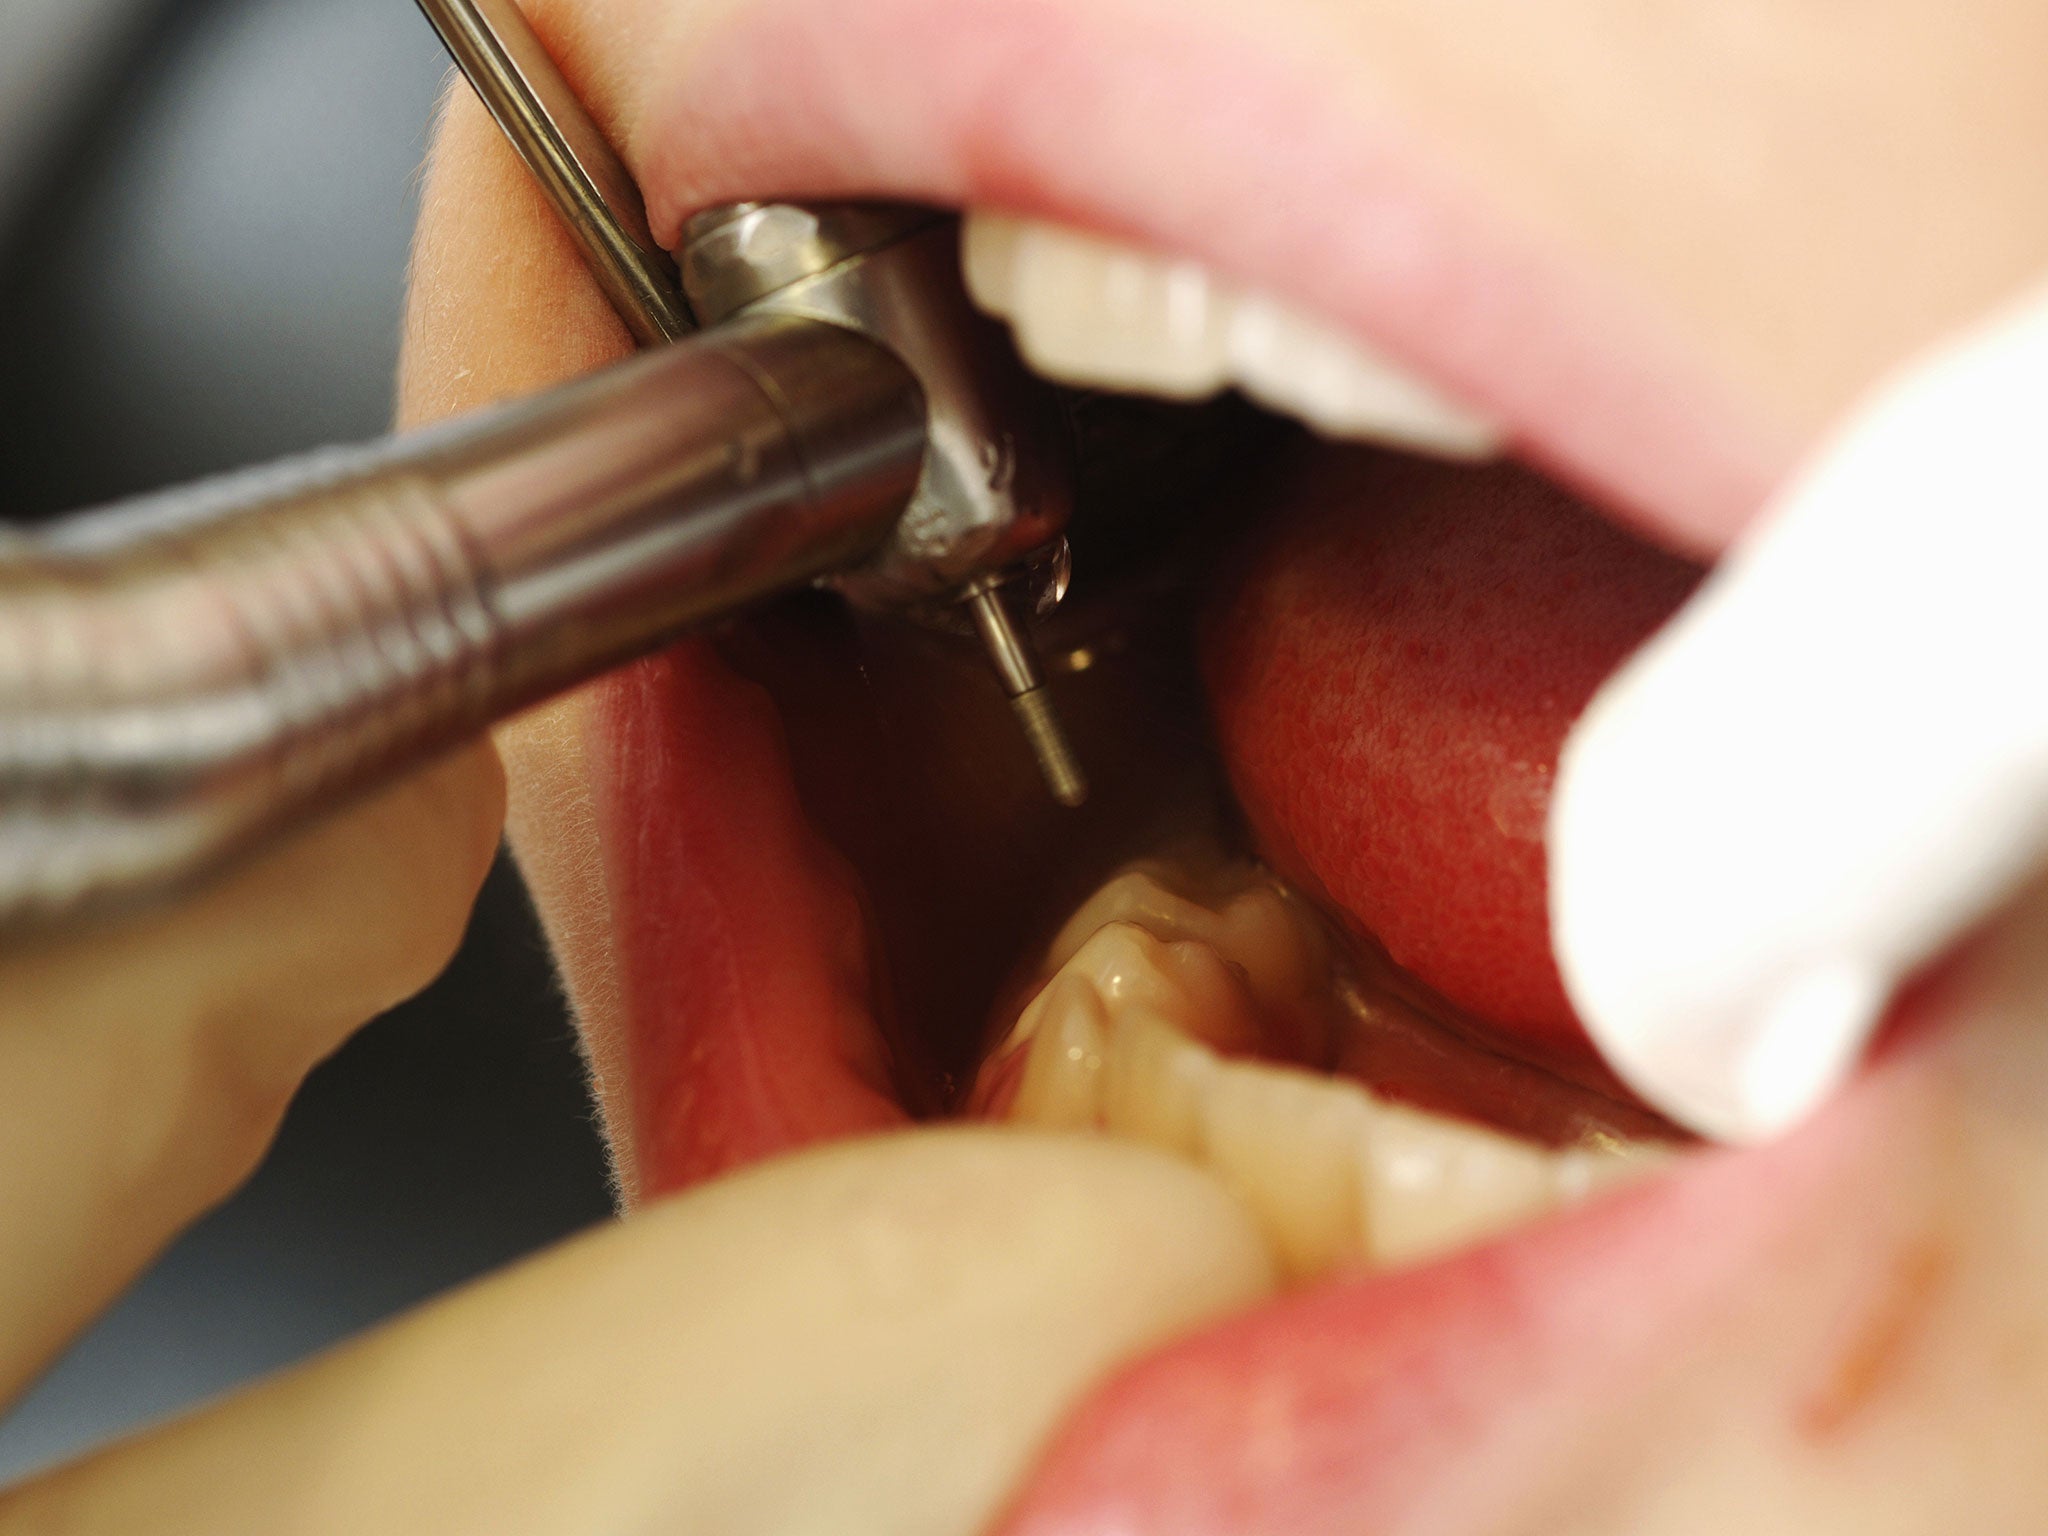 The British Dental Association (BDA) has accused the Government of commissioning only enough dentistry to treat about half the adult population